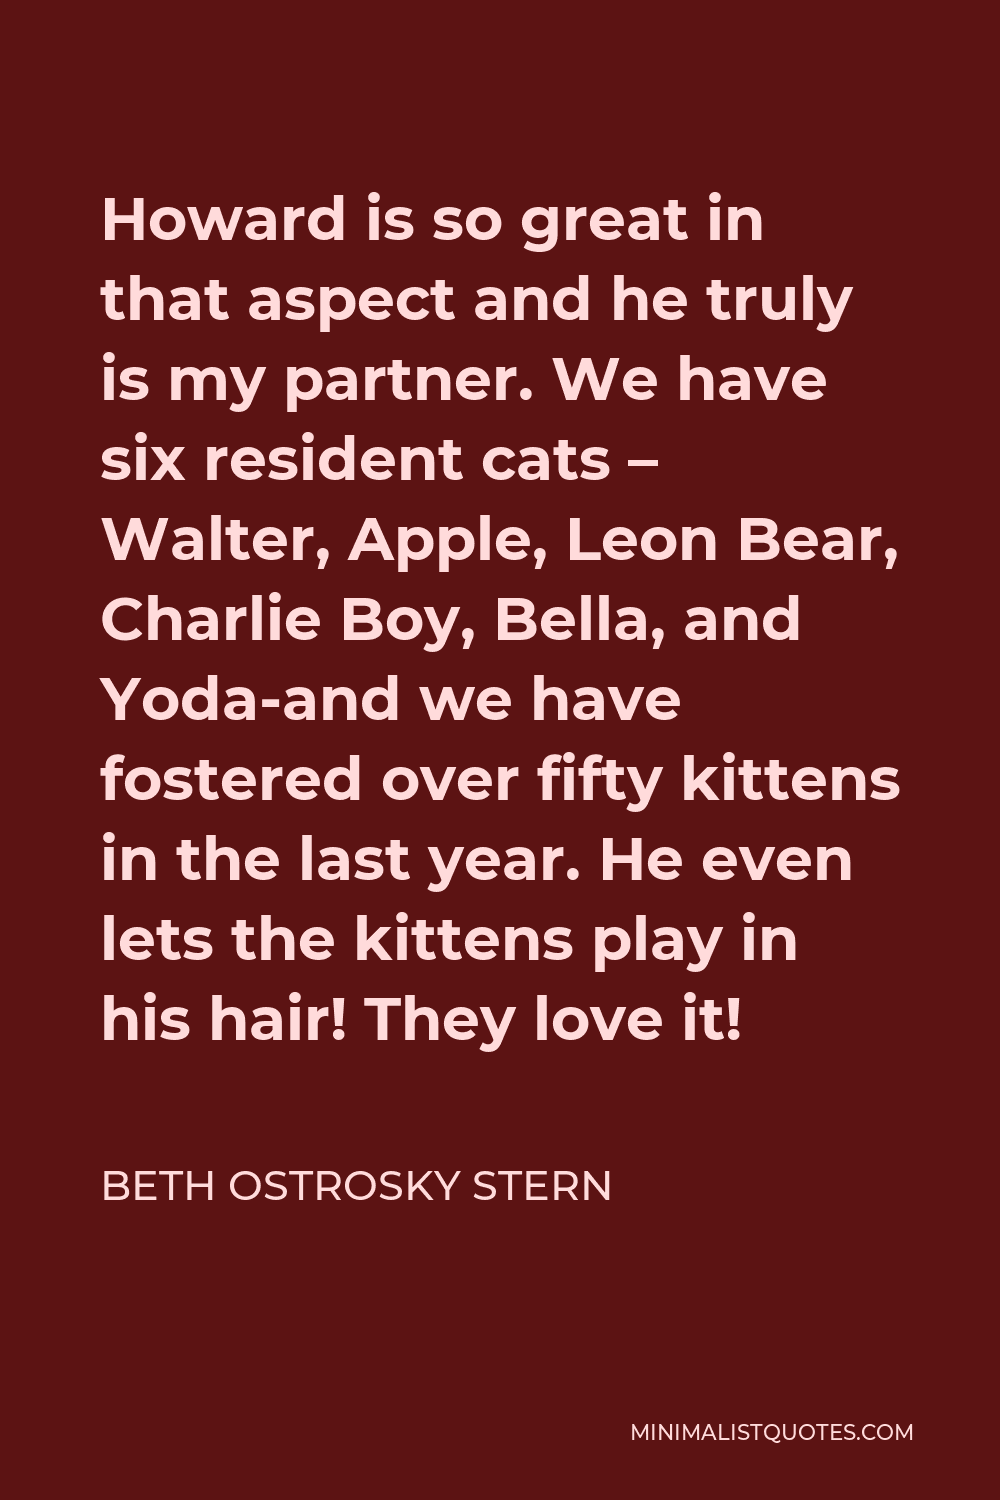 Beth Ostrosky Stern Quote - Howard is so great in that aspect and he truly is my partner. We have six resident cats – Walter, Apple, Leon Bear, Charlie Boy, Bella, and Yoda-and we have fostered over fifty kittens in the last year. He even lets the kittens play in his hair! They love it!